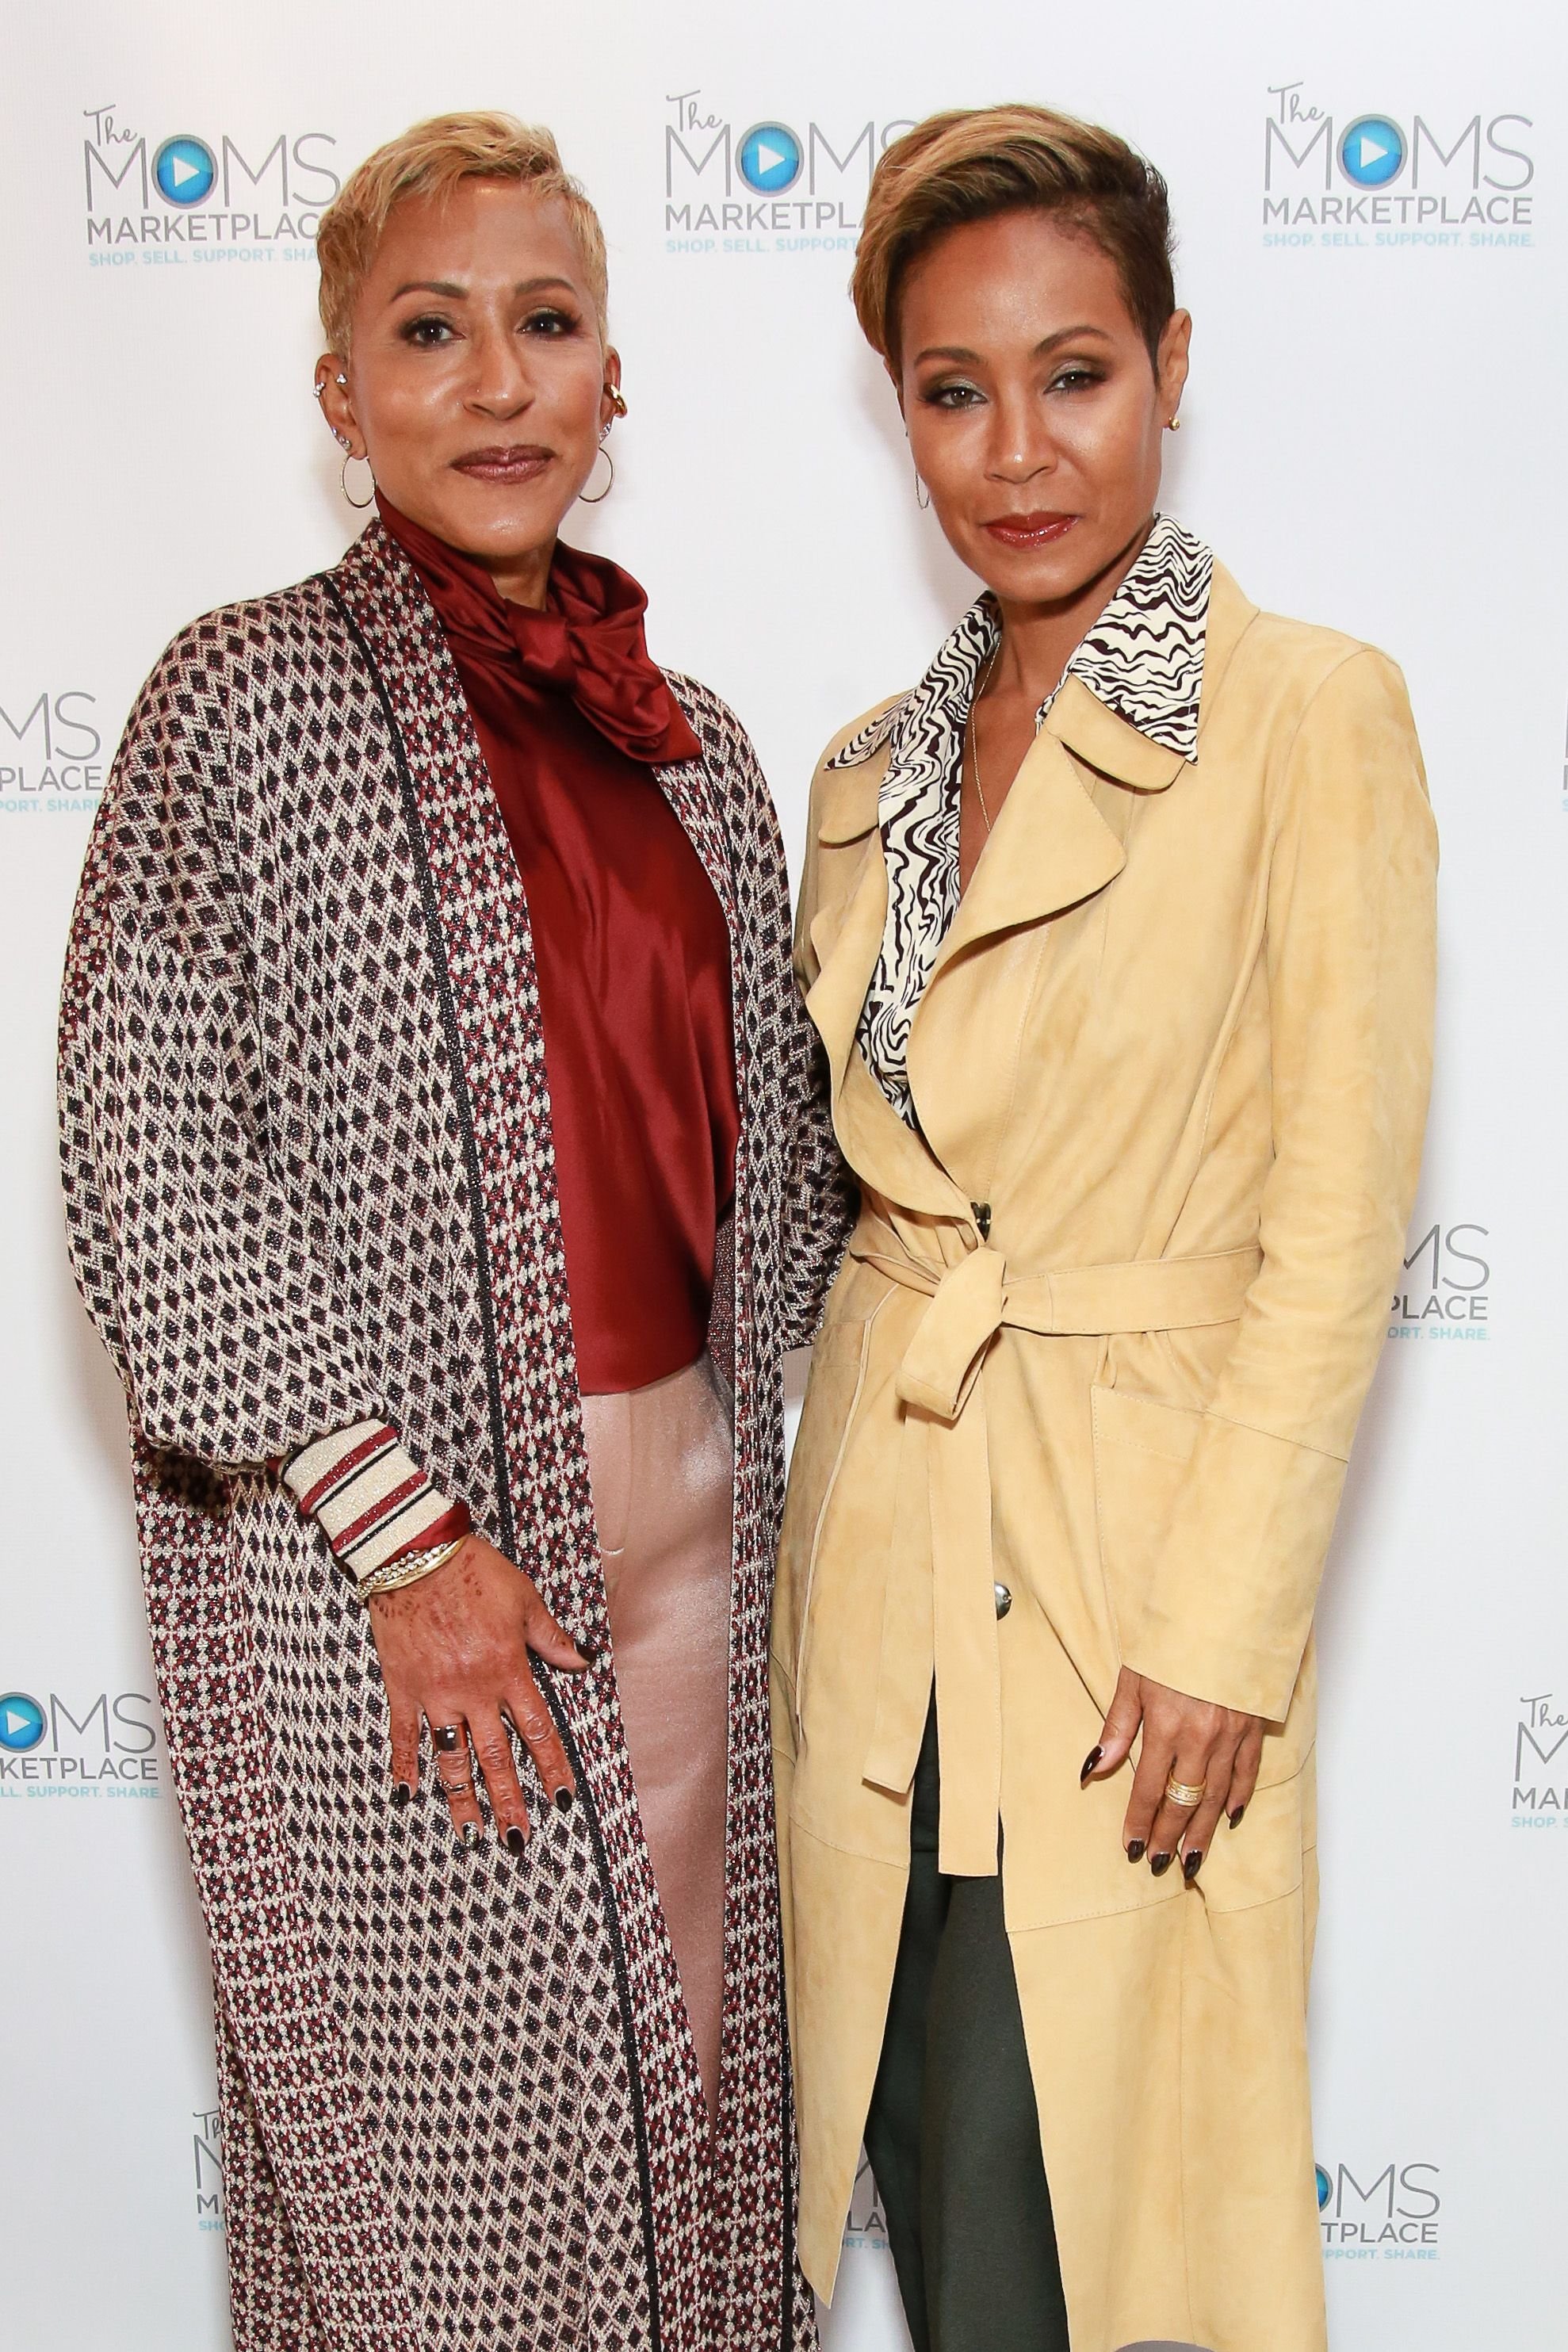 Adrienne Banfield-Norris and Jada Pinkett Smith at "The Moms" on October 23, 2018 | Photo: Getty Images